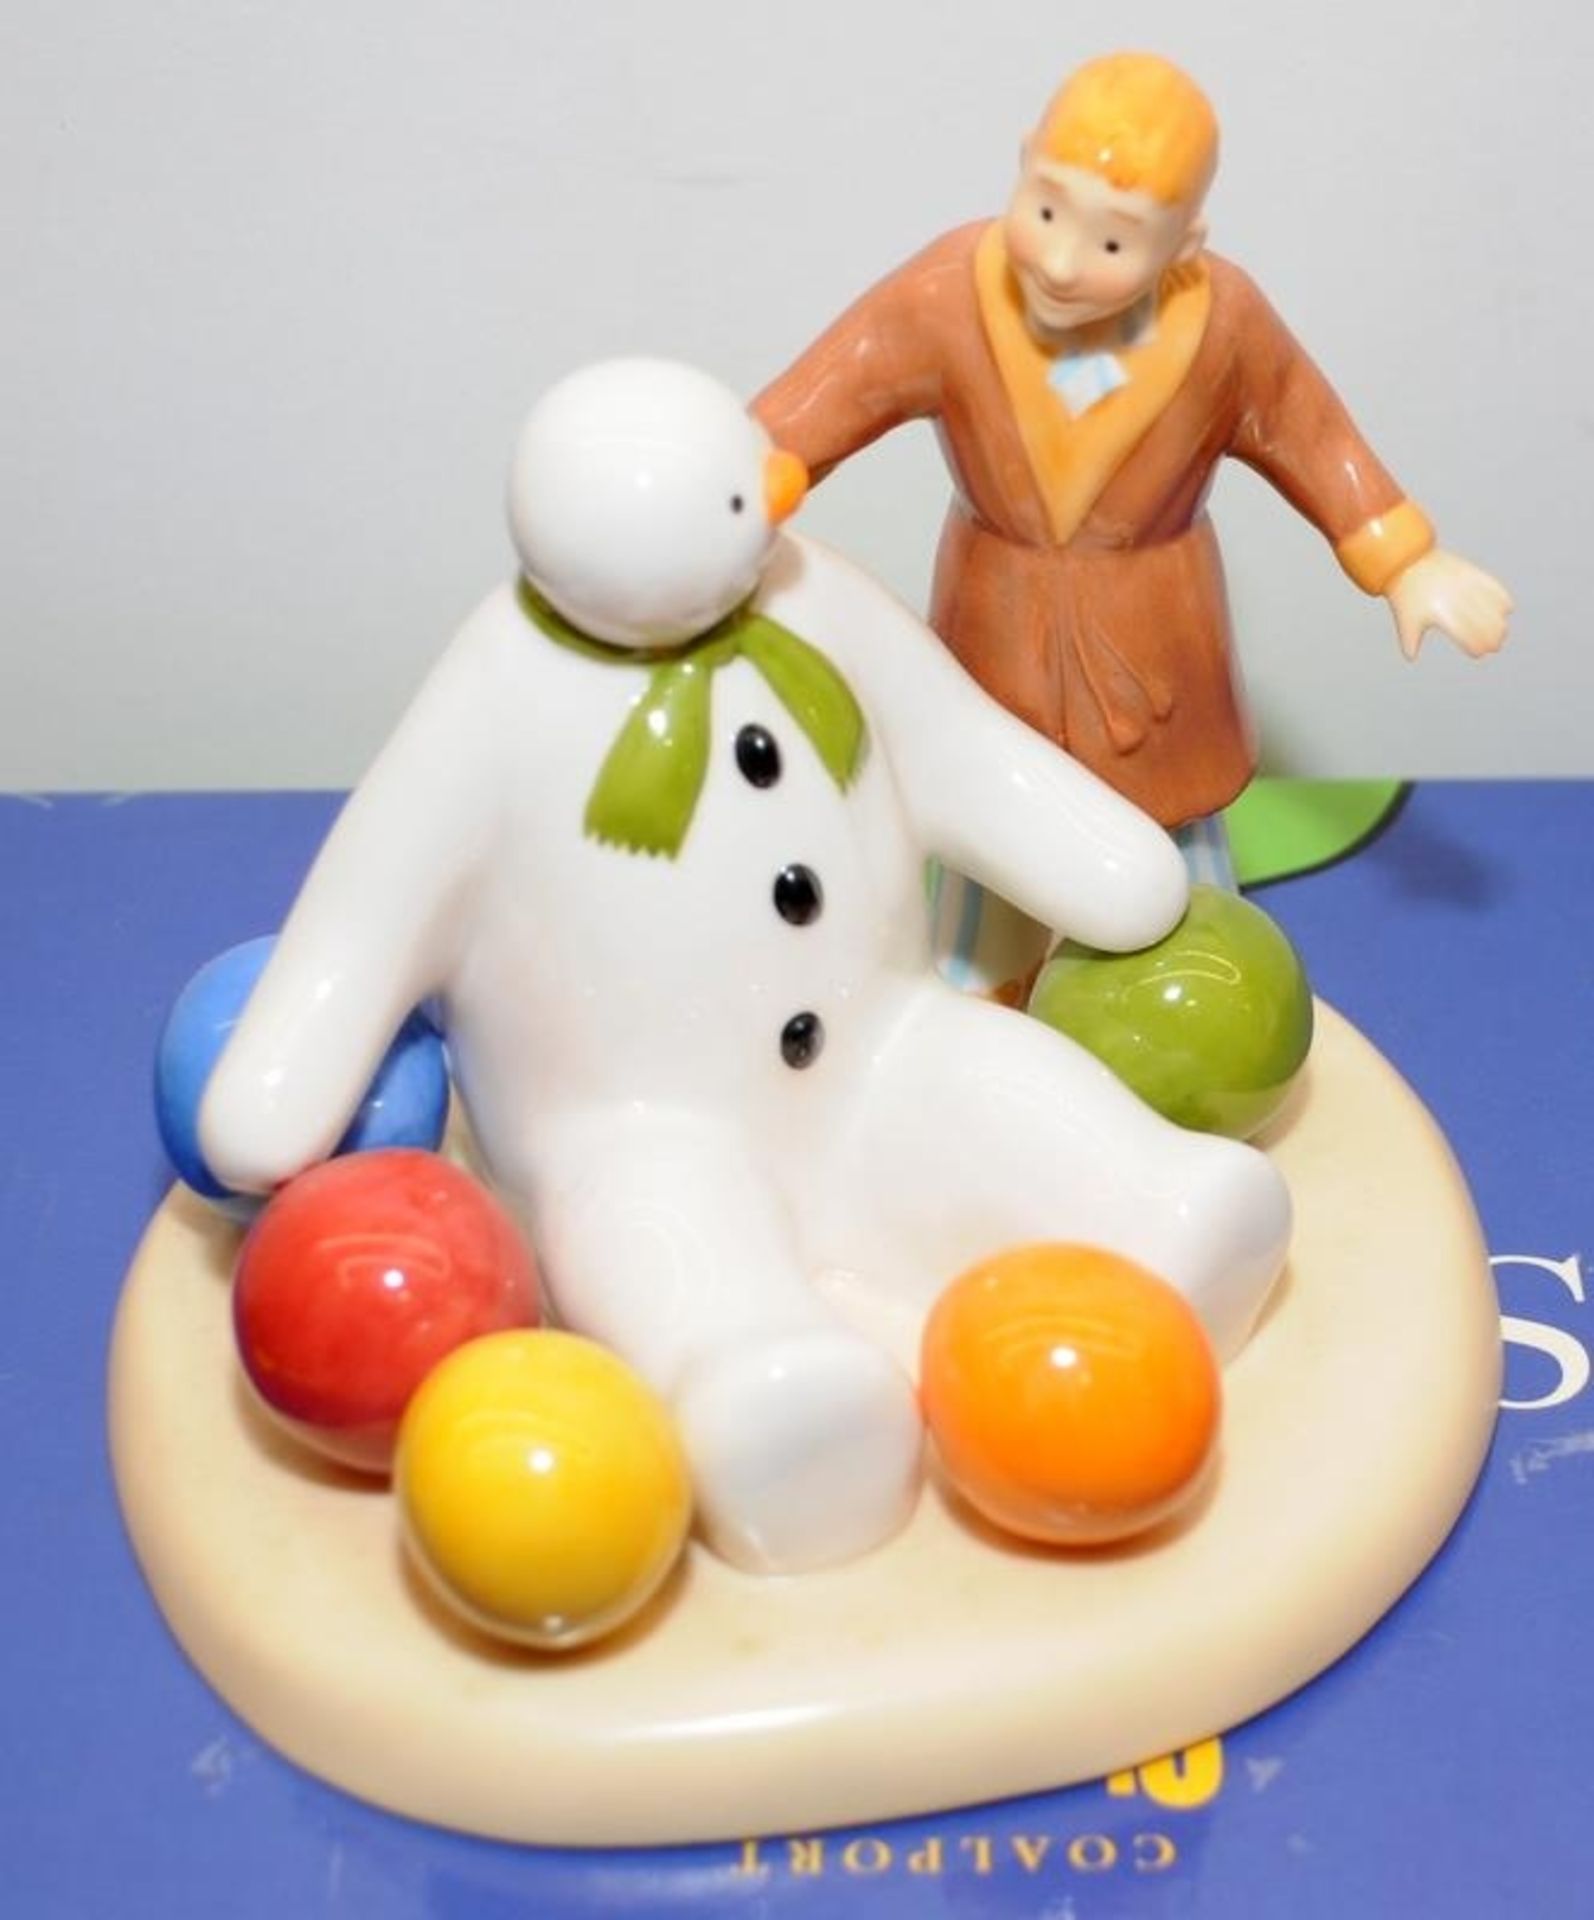 2 x Coalport The Snowman figurines: At The Party - Limited Edition 1199/2000 c/w Soft Landing. - Image 3 of 4